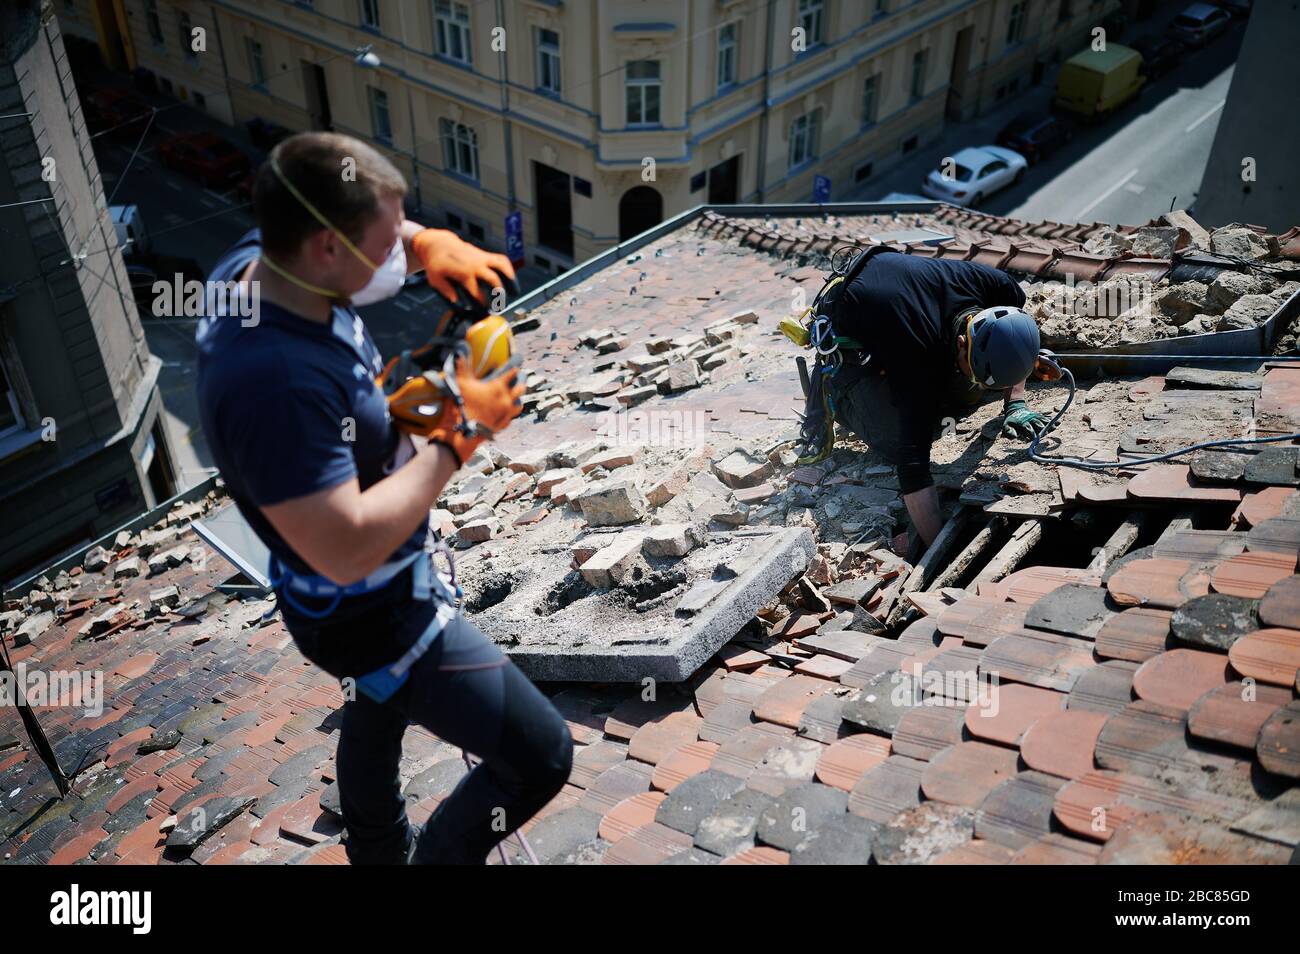 Climbers fixing damaged roofs after 5.5 magnitude earthquake that struck Zagreb in March 2020. Stock Photo